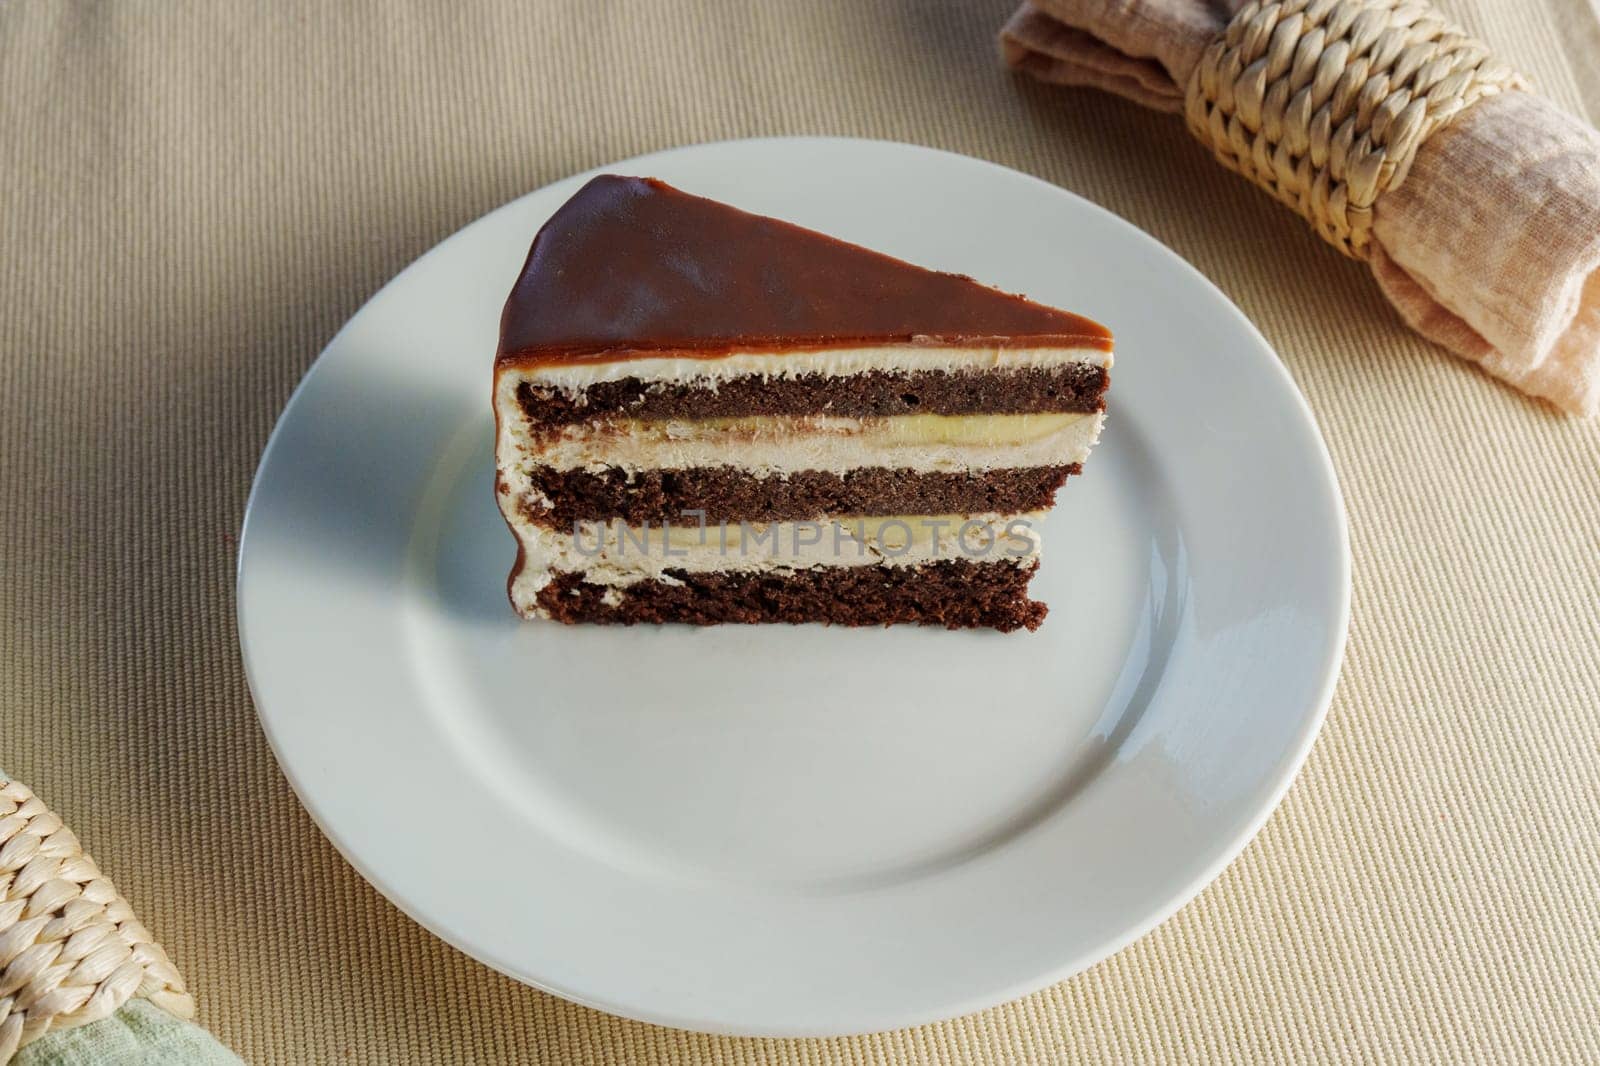 Delicate Slice: Decadent Chocolate Cake Perched on a Gleaming White Plate